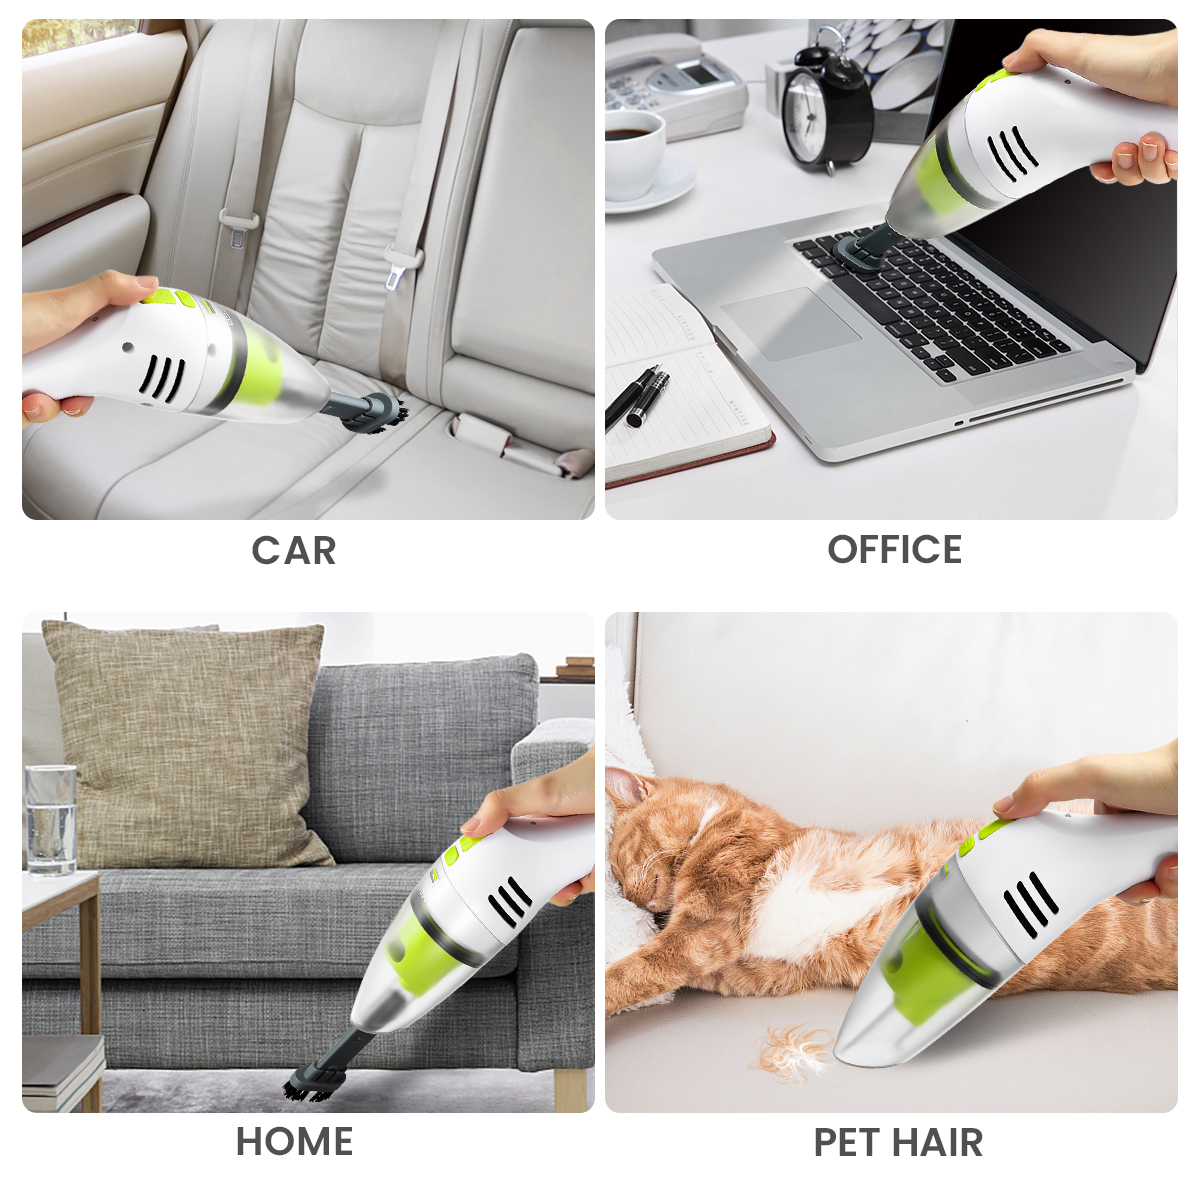 MECO-Keyboard-Cleaner-Rechargeable-Mini-Vacuum-Wet-Dry-Cordless-Desktop-Vacuum-Cleaner-for-Cleaning--1795359-5